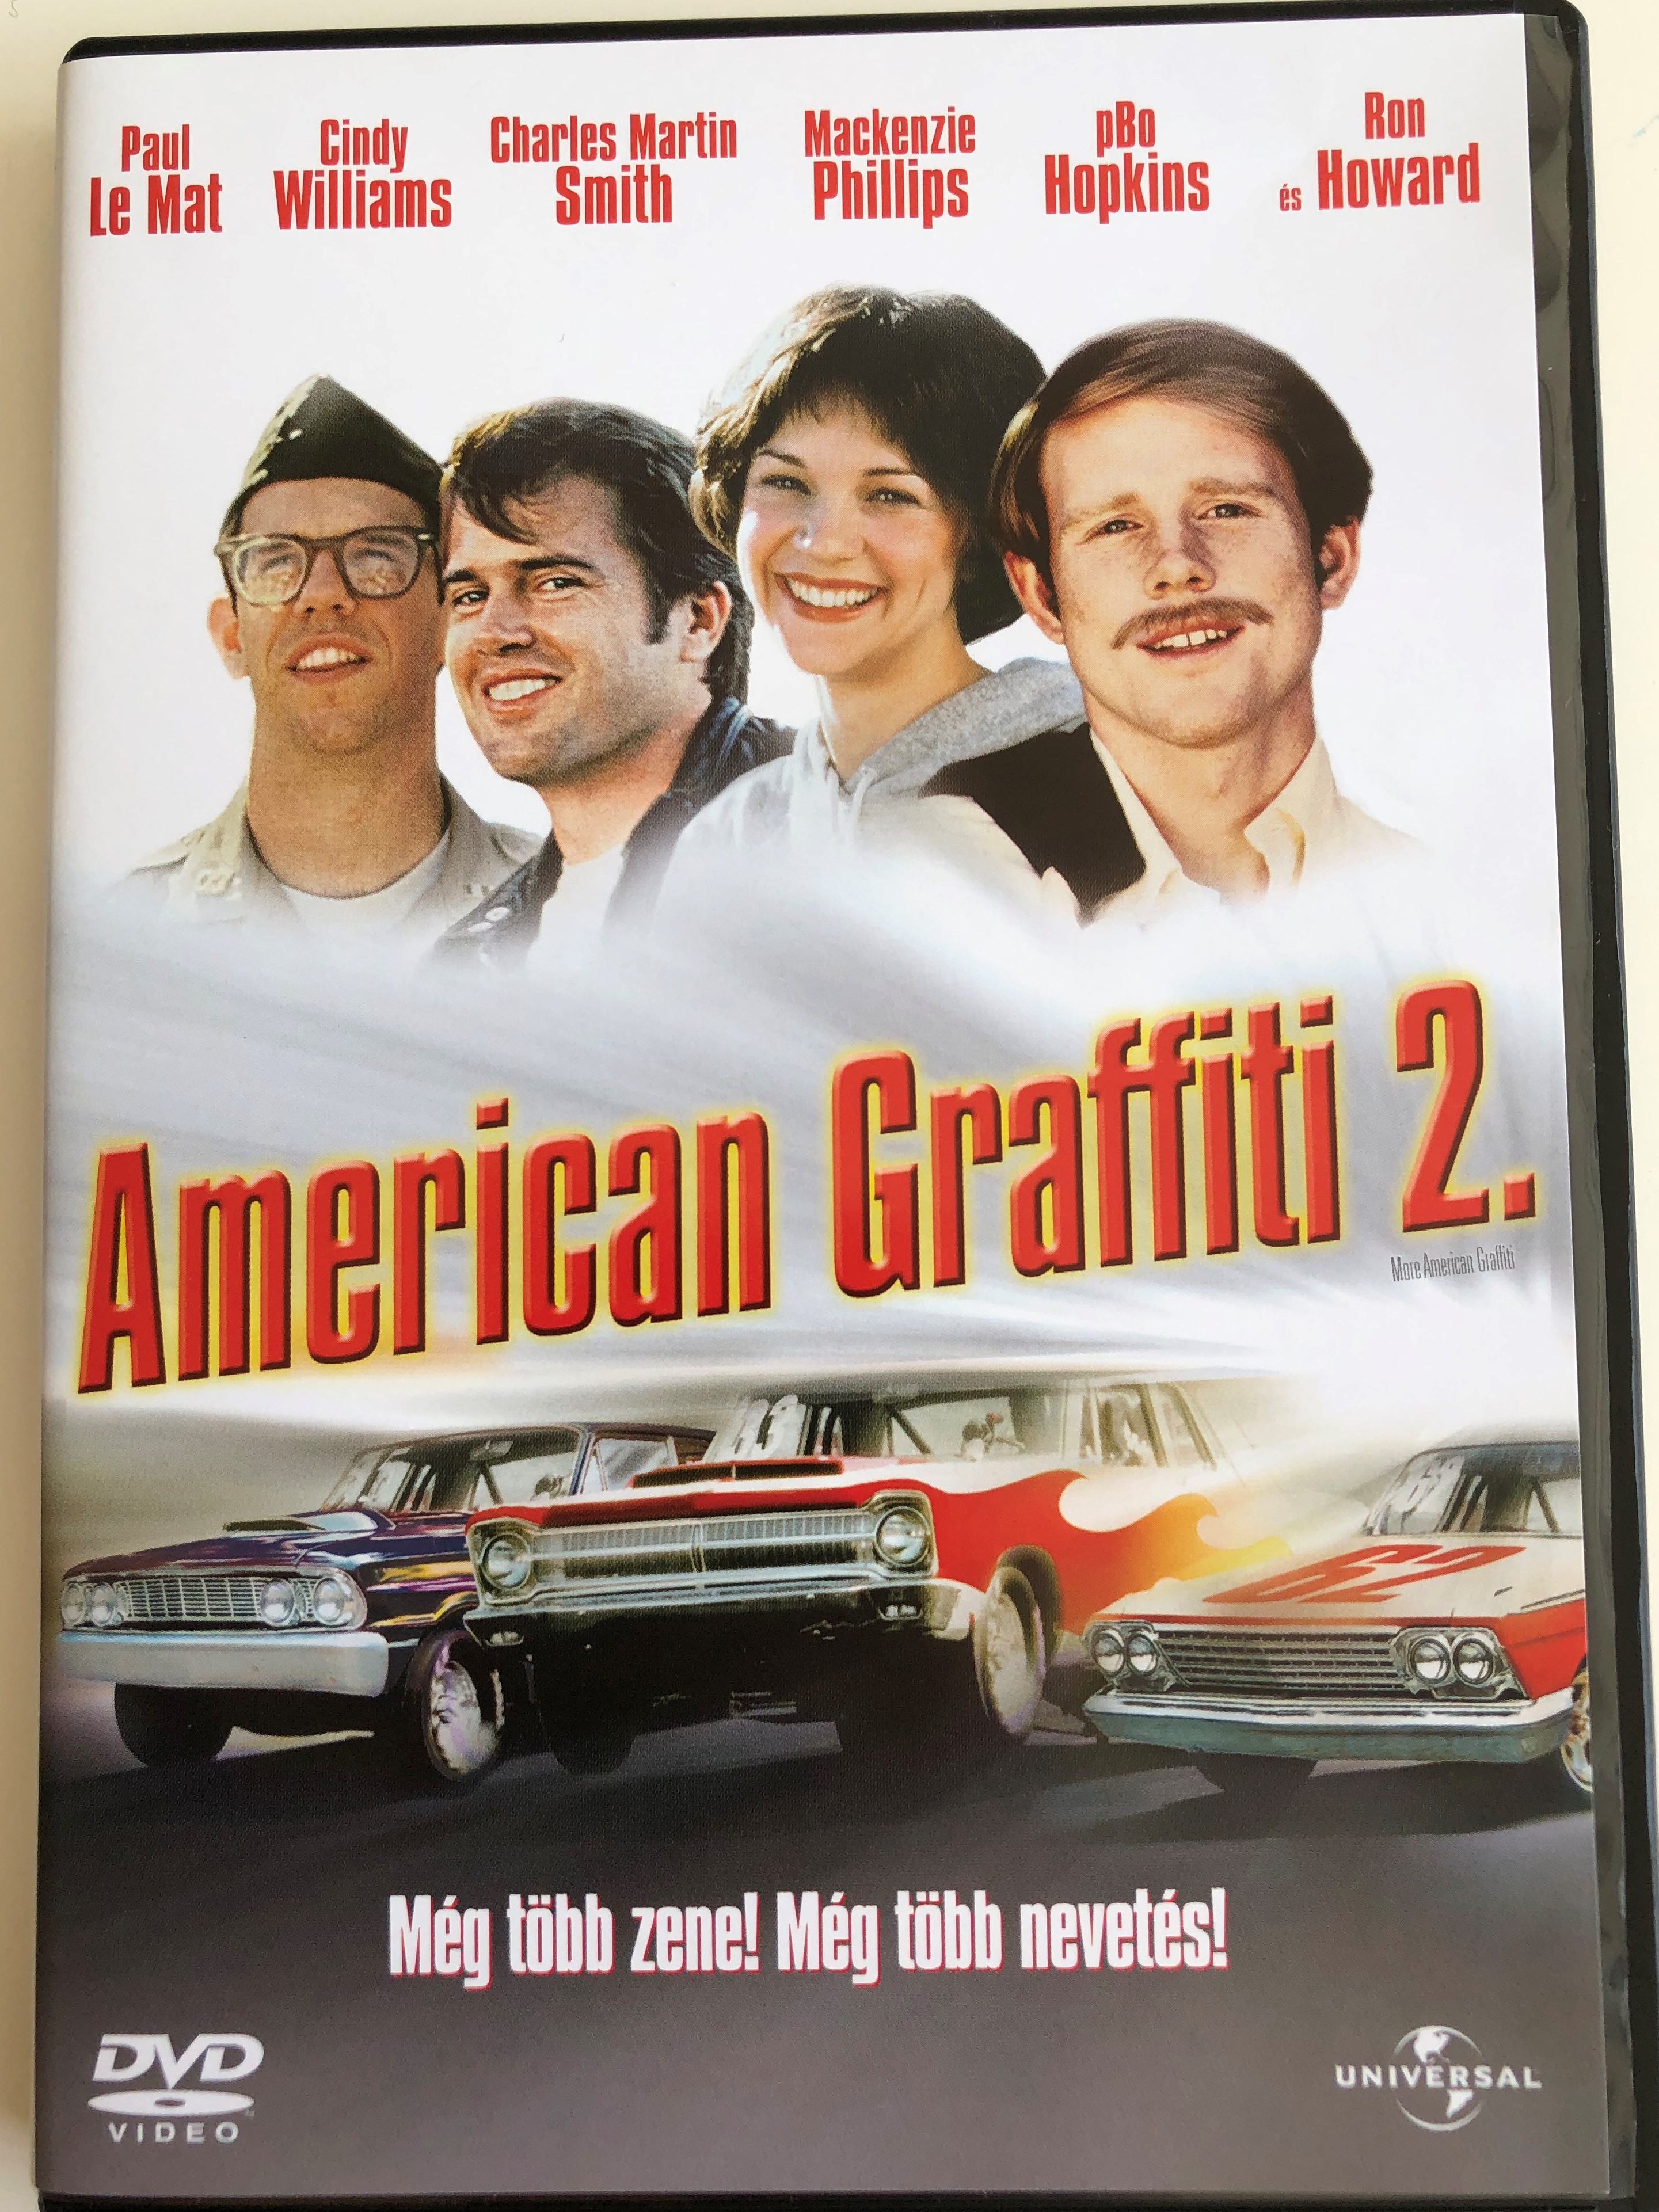 american-graffiti-2.-dvd-1979-directed-by-bill-l.-norton-starring-candy-clark-bo-hopkins-ron-howard-paul-le-mat-mackenzie-phillips-charles-martin-smith-cindy-williams-based-on-characters-by-george-lucas-gloria-katz-1-.jpg